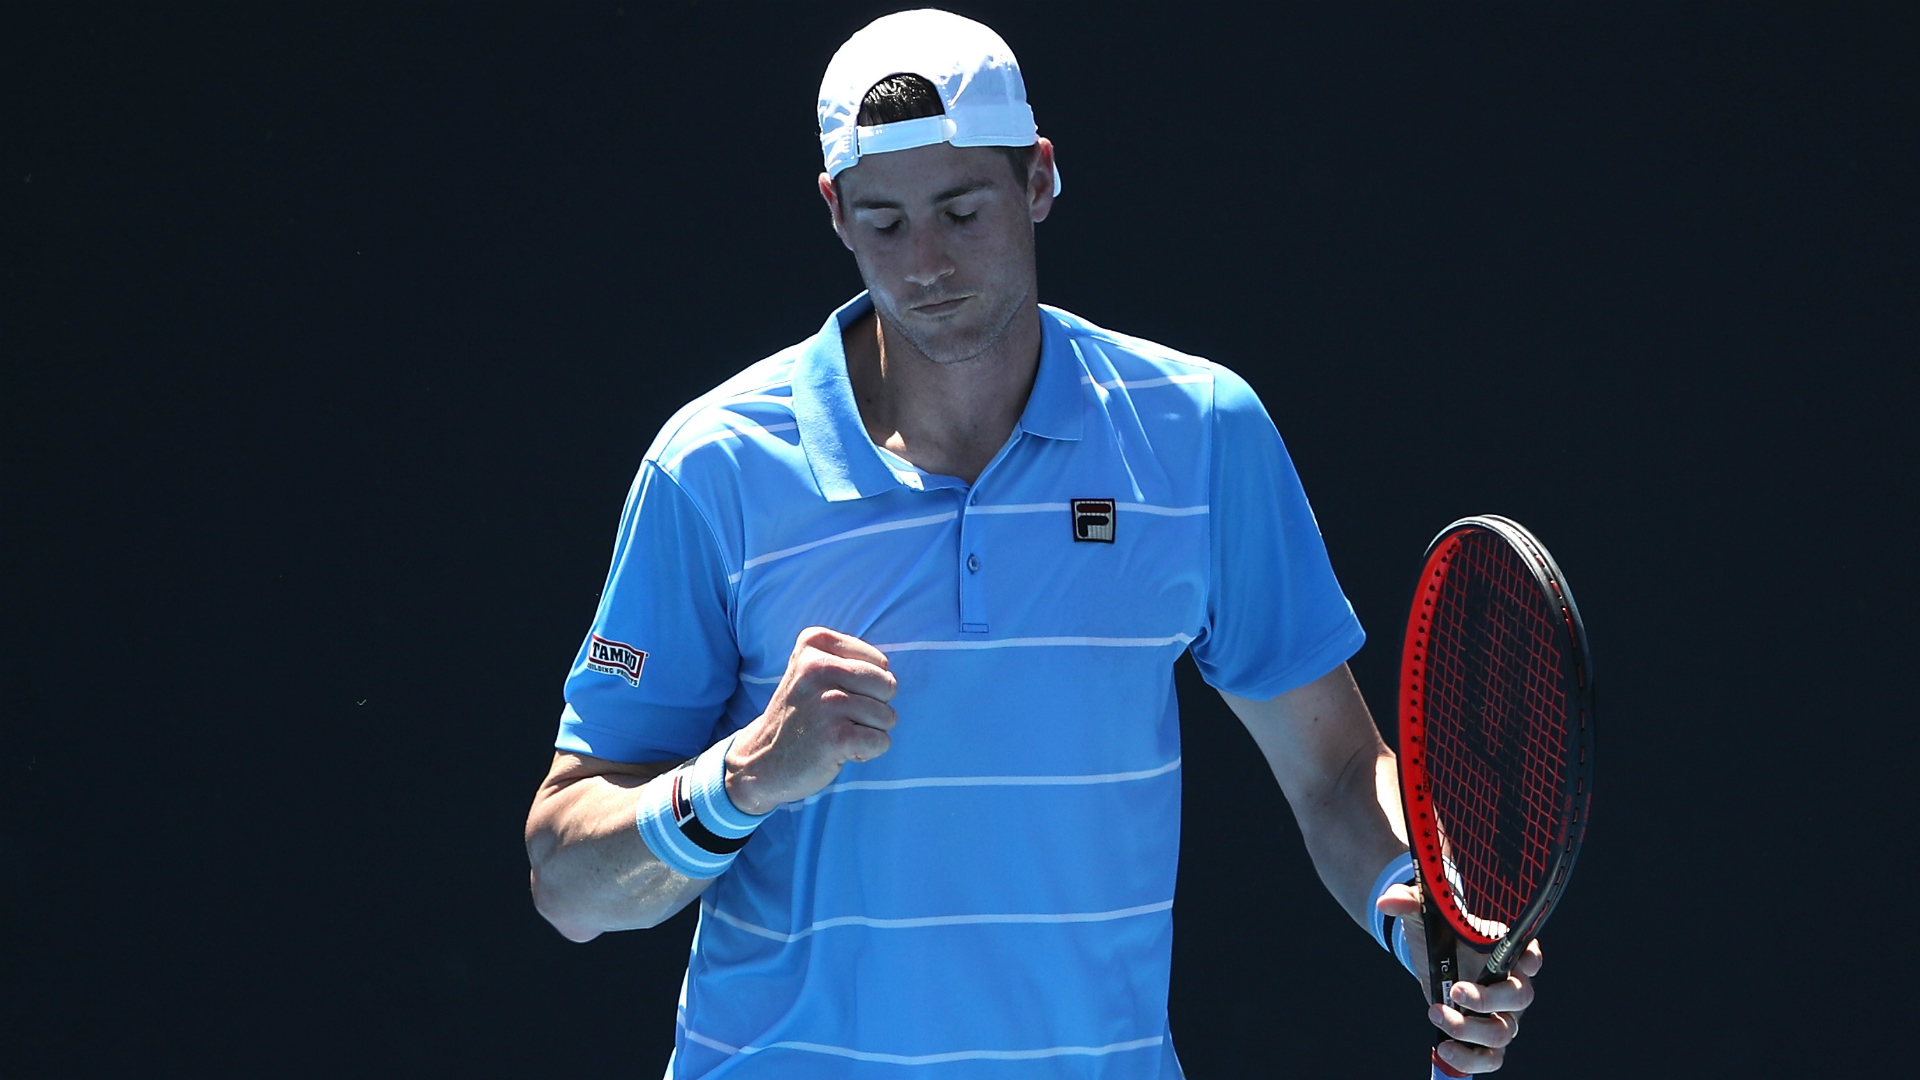 John Isner outlasted Polish opponent Kamil Majchrzak 6-4 6-7 (5-7) 6-3 to book a spot in the last eight at Newport.